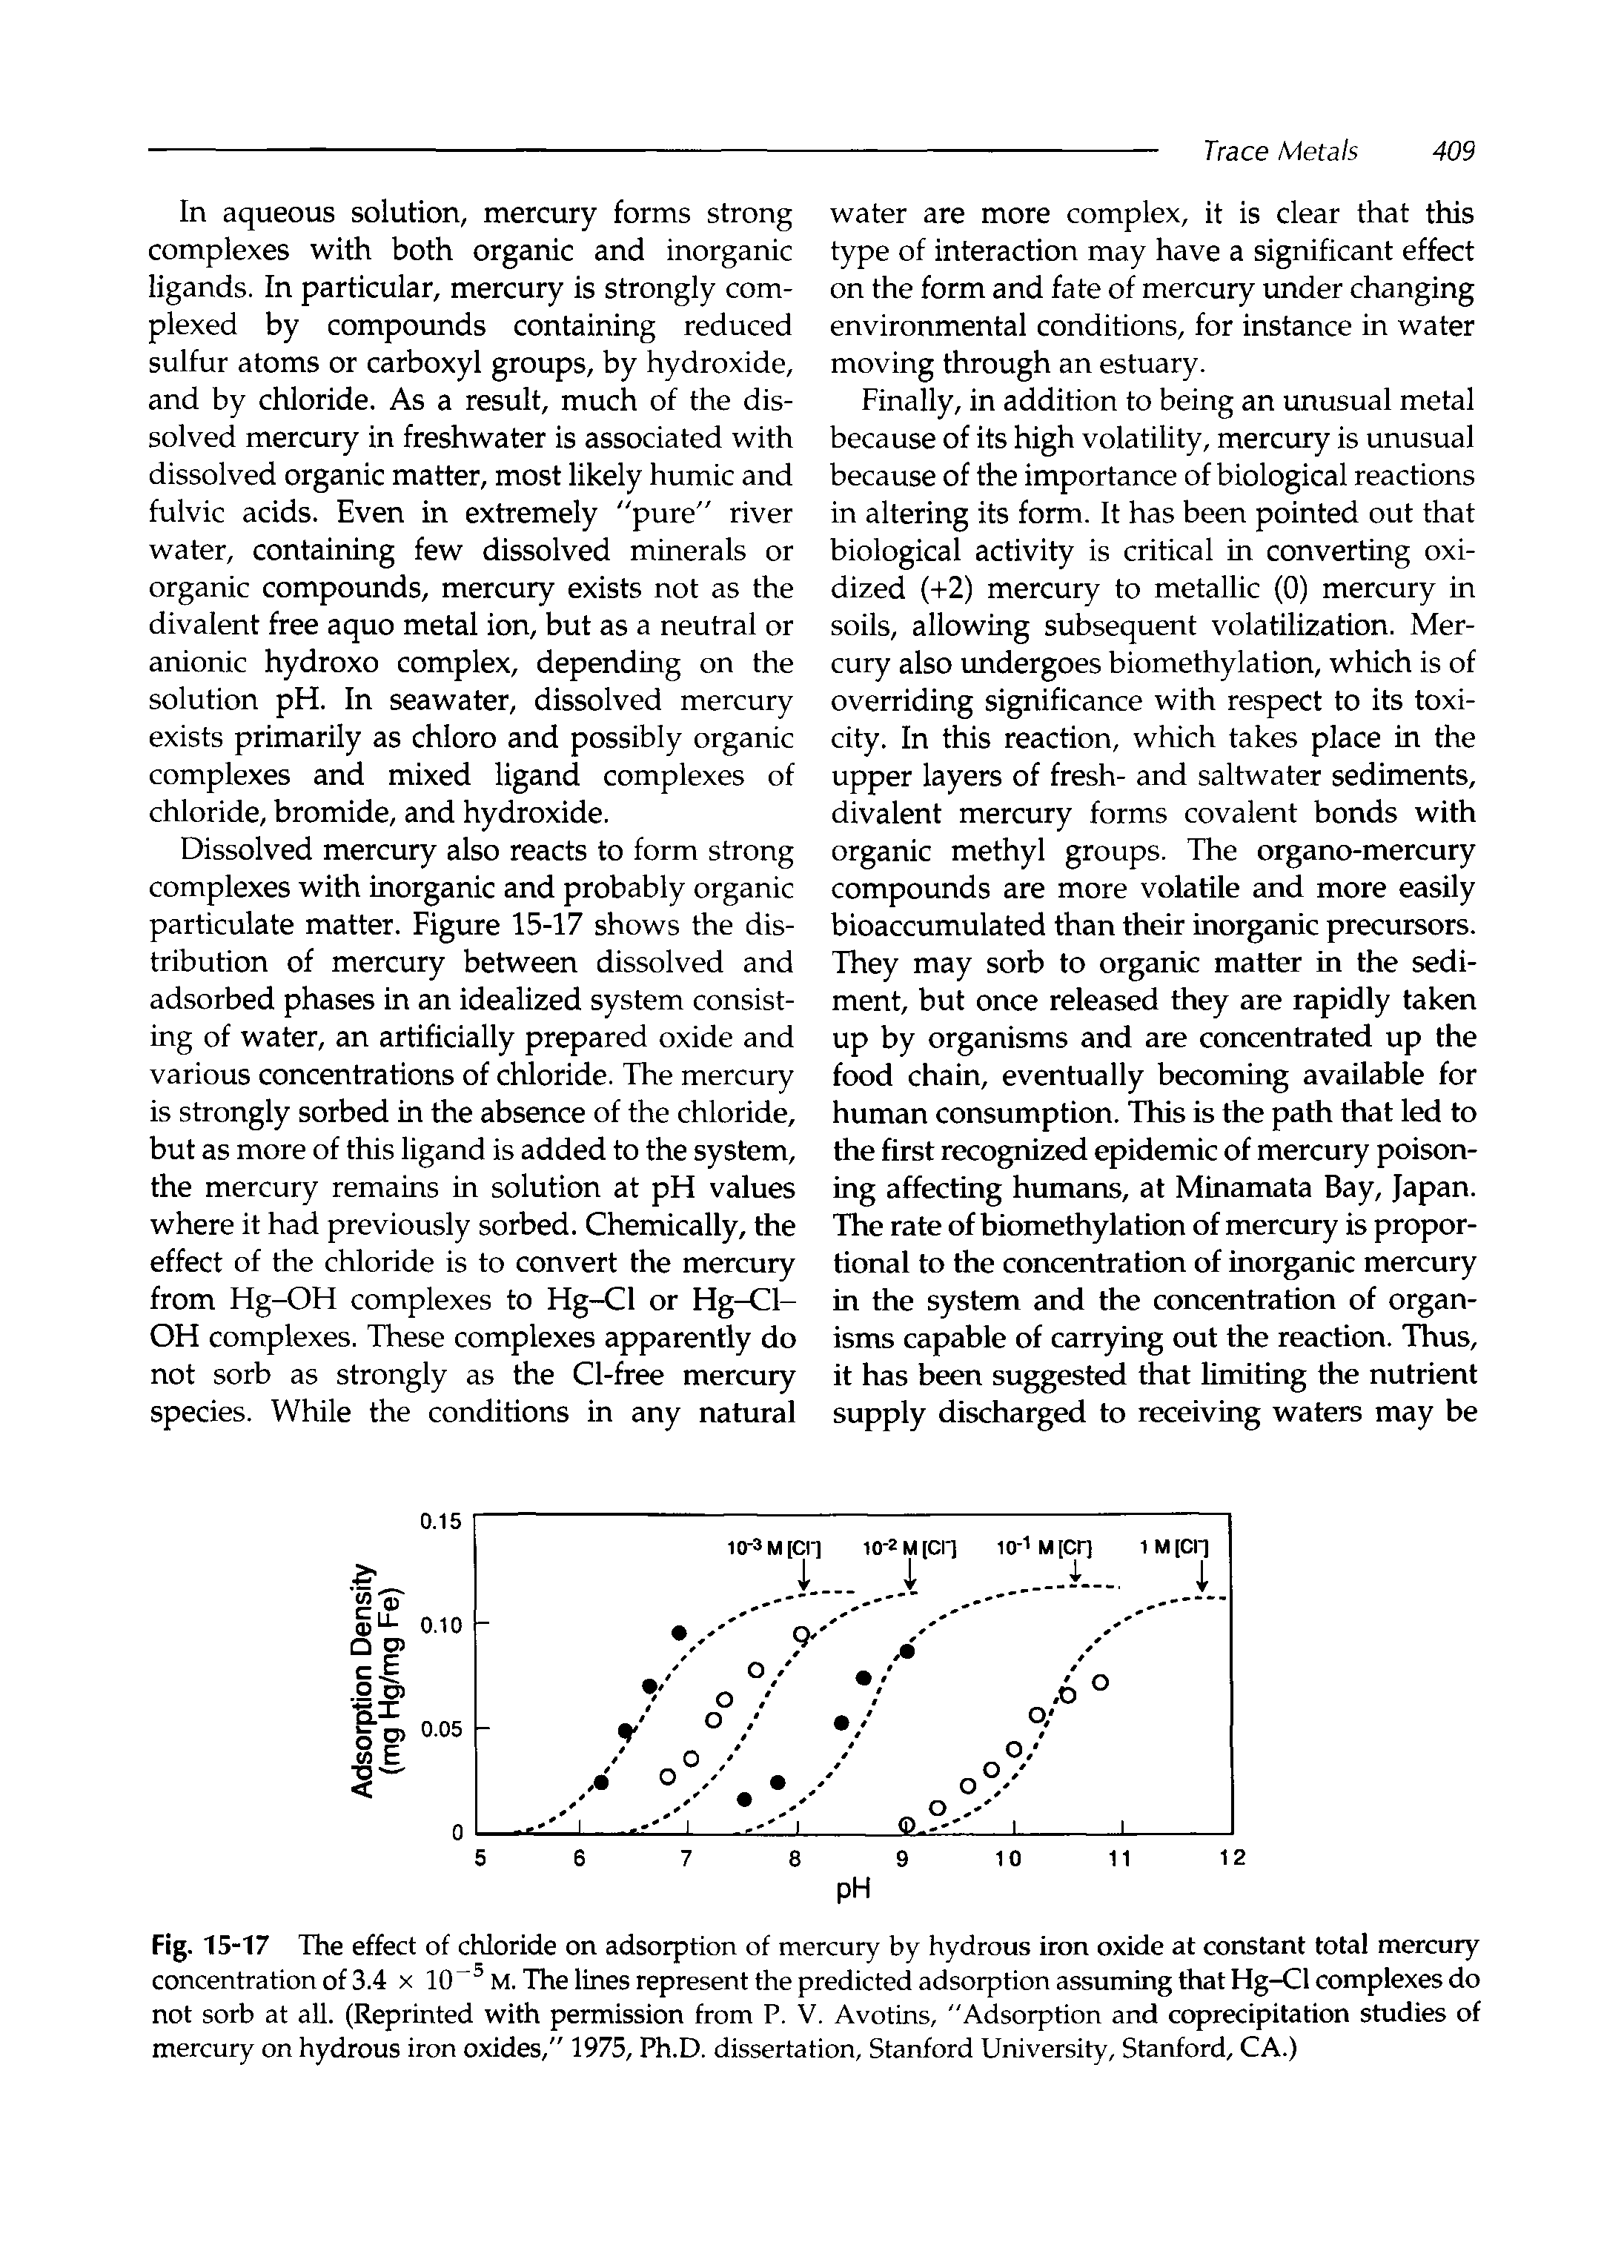 Fig. 15-17 The effect of chloride on adsorption of mercury by hydrous iron oxide at constant total mercury concentration of 3.4 x 10 M. The lines represent the predicted adsorption assuming that Hg-Cl complexes do not sorb at all. (Reprinted with permission from P. V. Avotins, Adsorption and coprecipitation studies of mercury on hydrous iron oxides," 1975, Ph.D. dissertation, Stanford University, Stanford, CA.)...